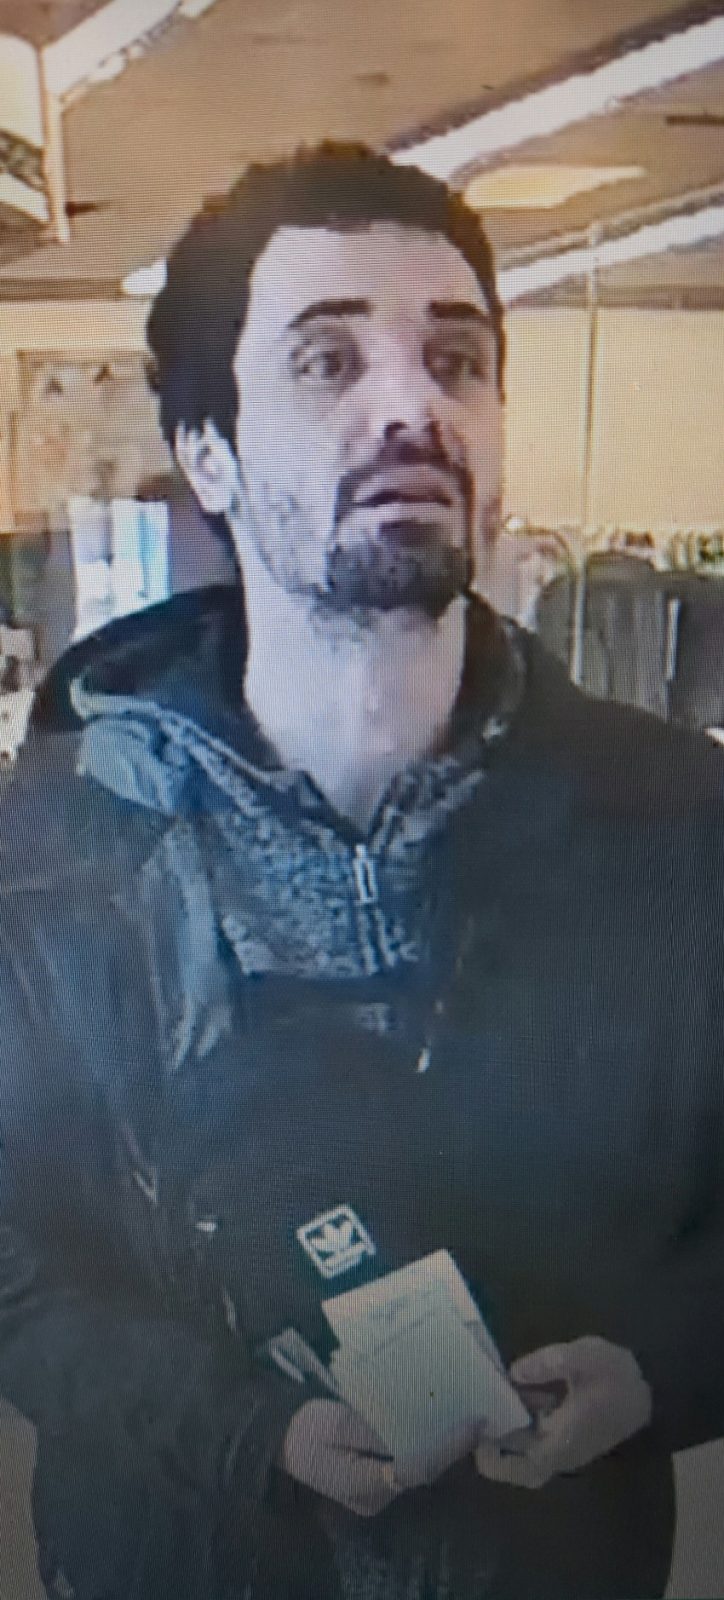 Hawkesbury police warn of counterfeit bills, looking for suspect